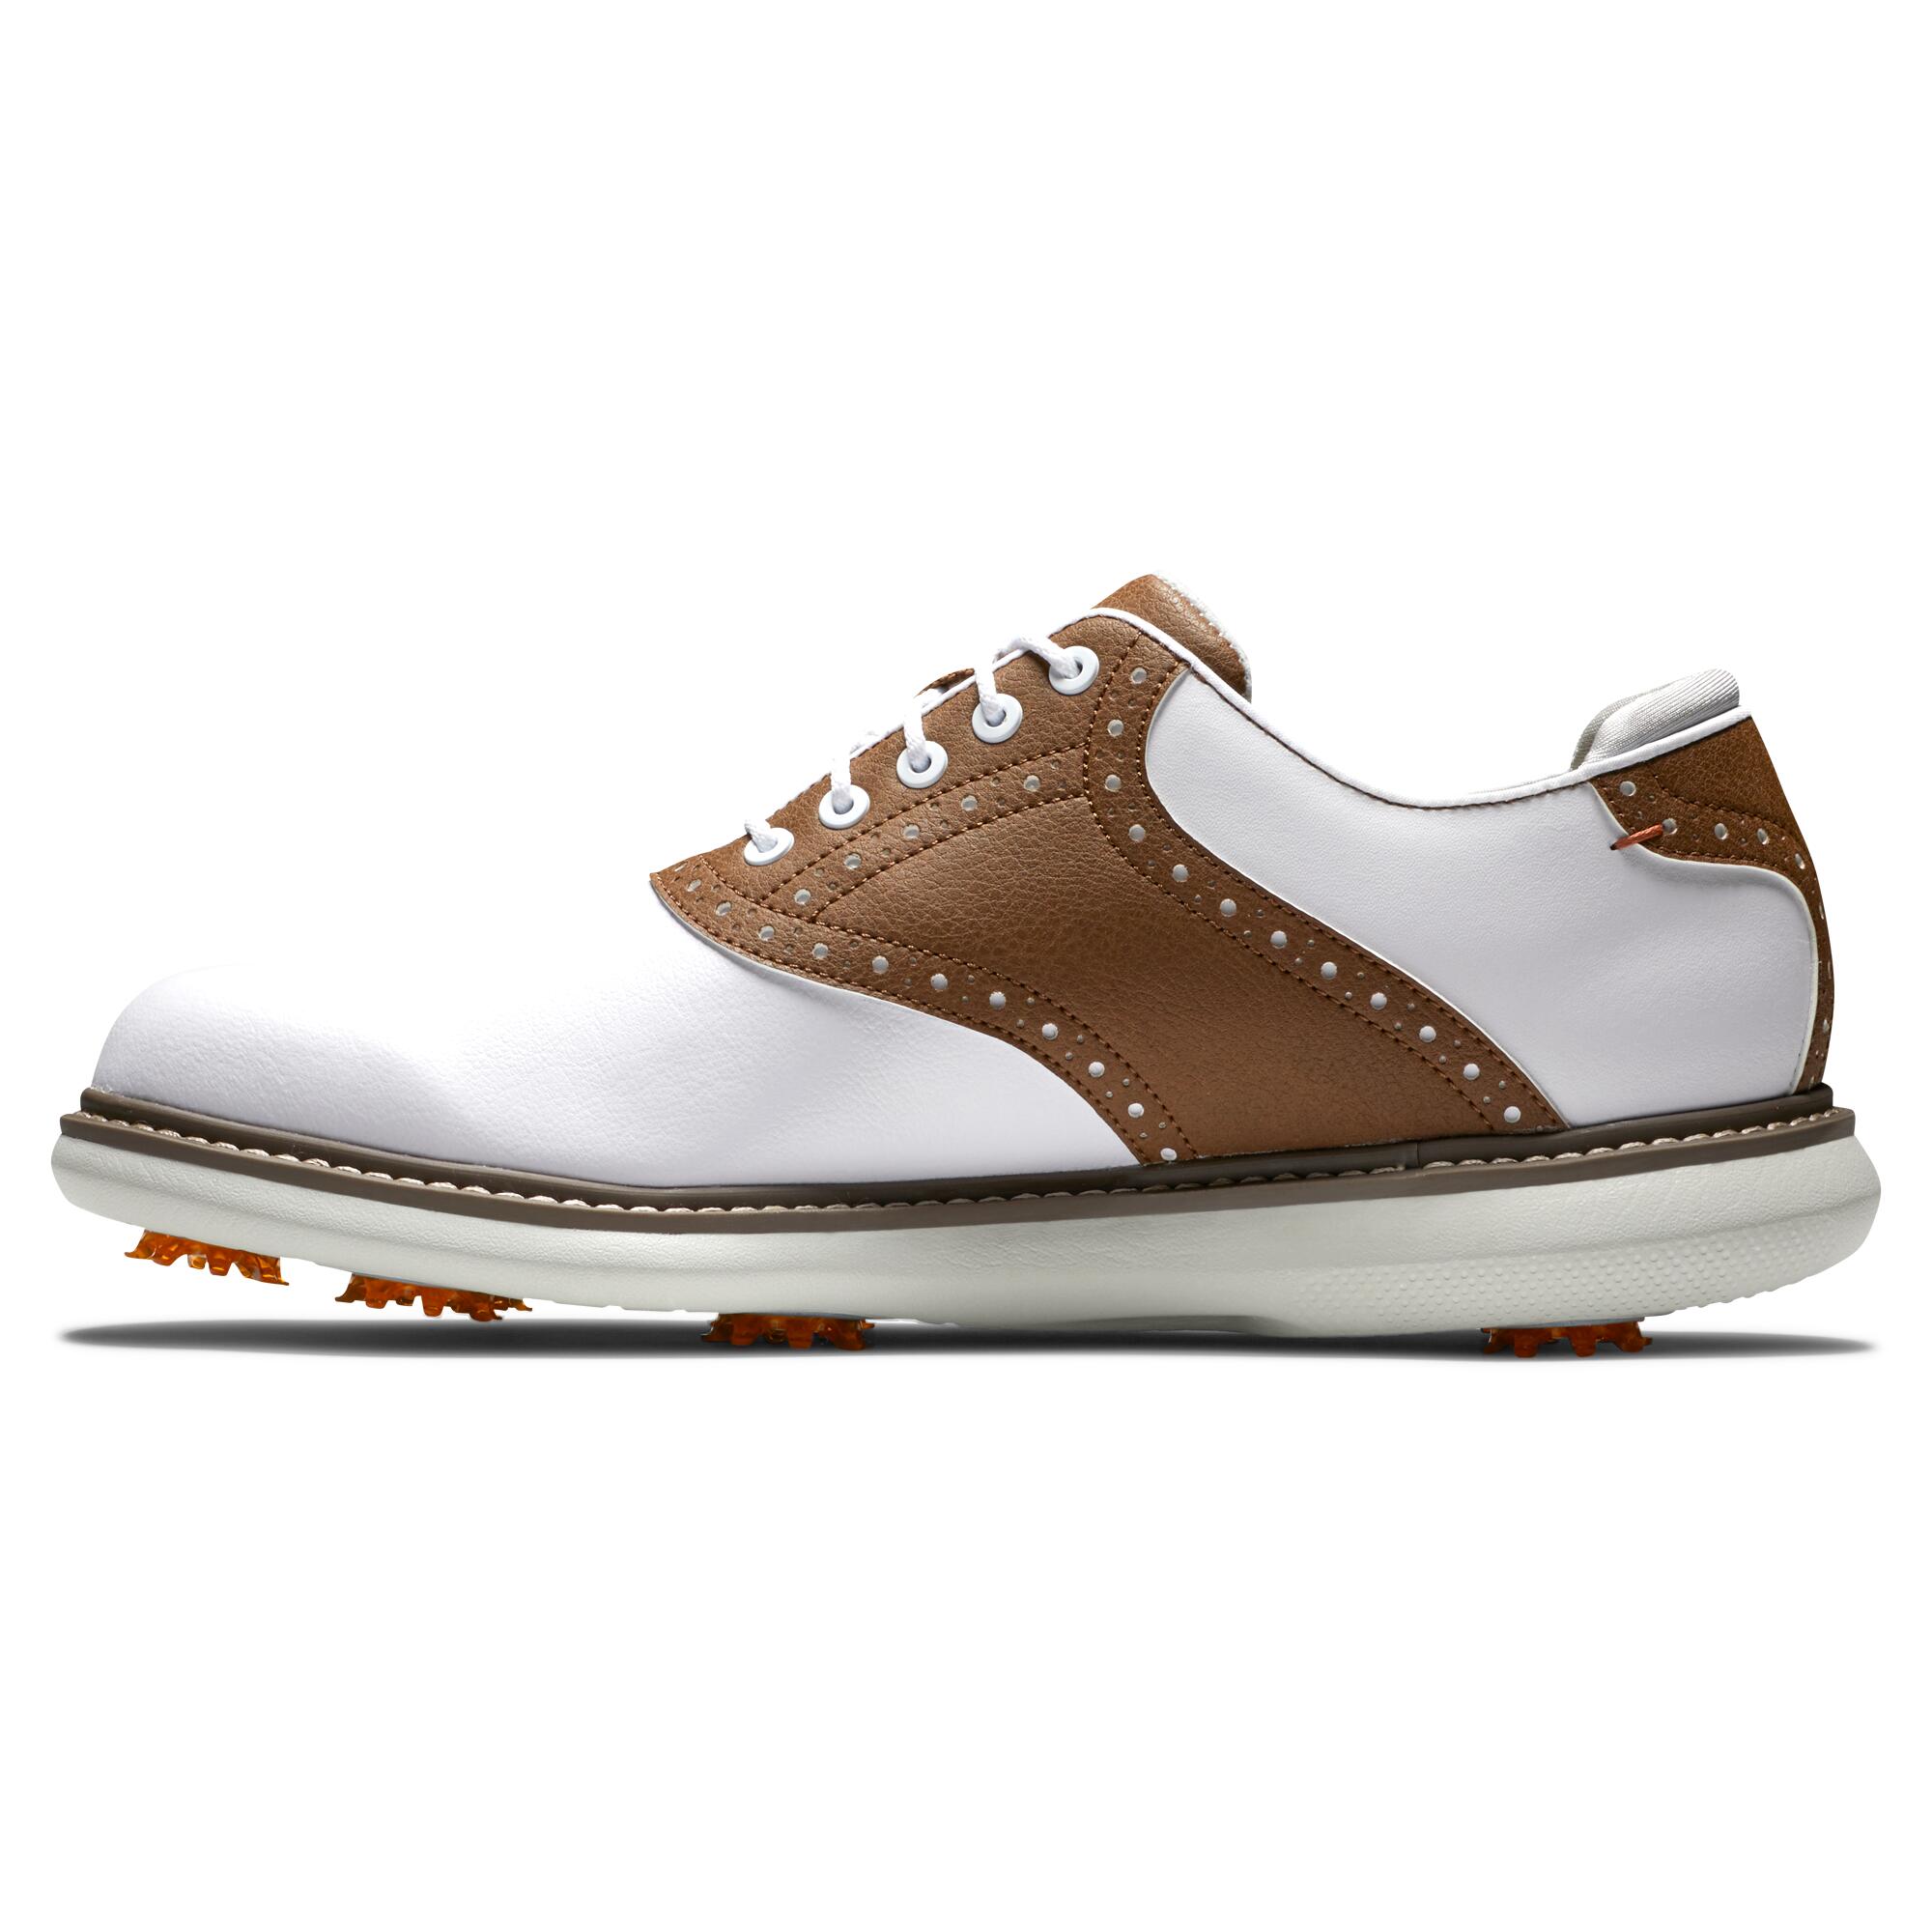 Men's golf shoes Footjoy Traditions - white and brown 2/7